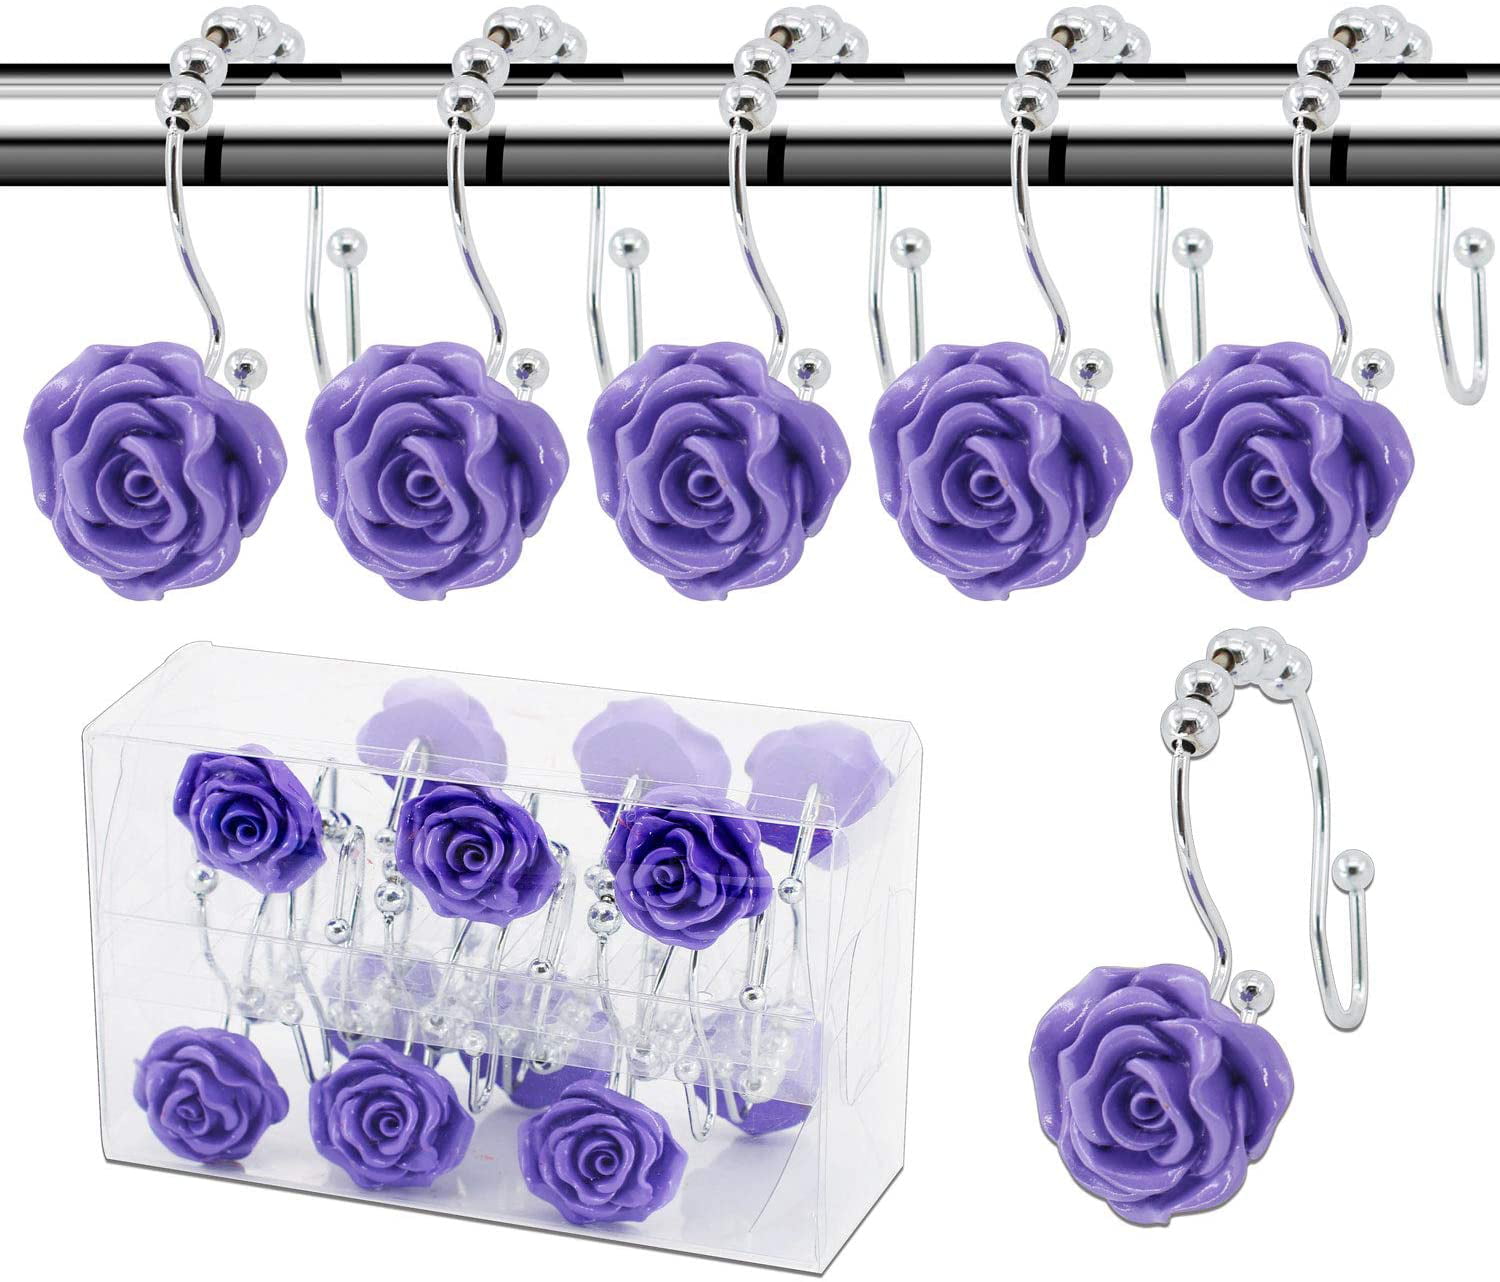 UFURMATE Shower Curtain Hooks Red 12Pcs Stainless Steel Rustproof Decorative Shower Hook Double Glide Shower Curtain Rings with Decorative Resin Rose Flower for Bathroom Shower Rods